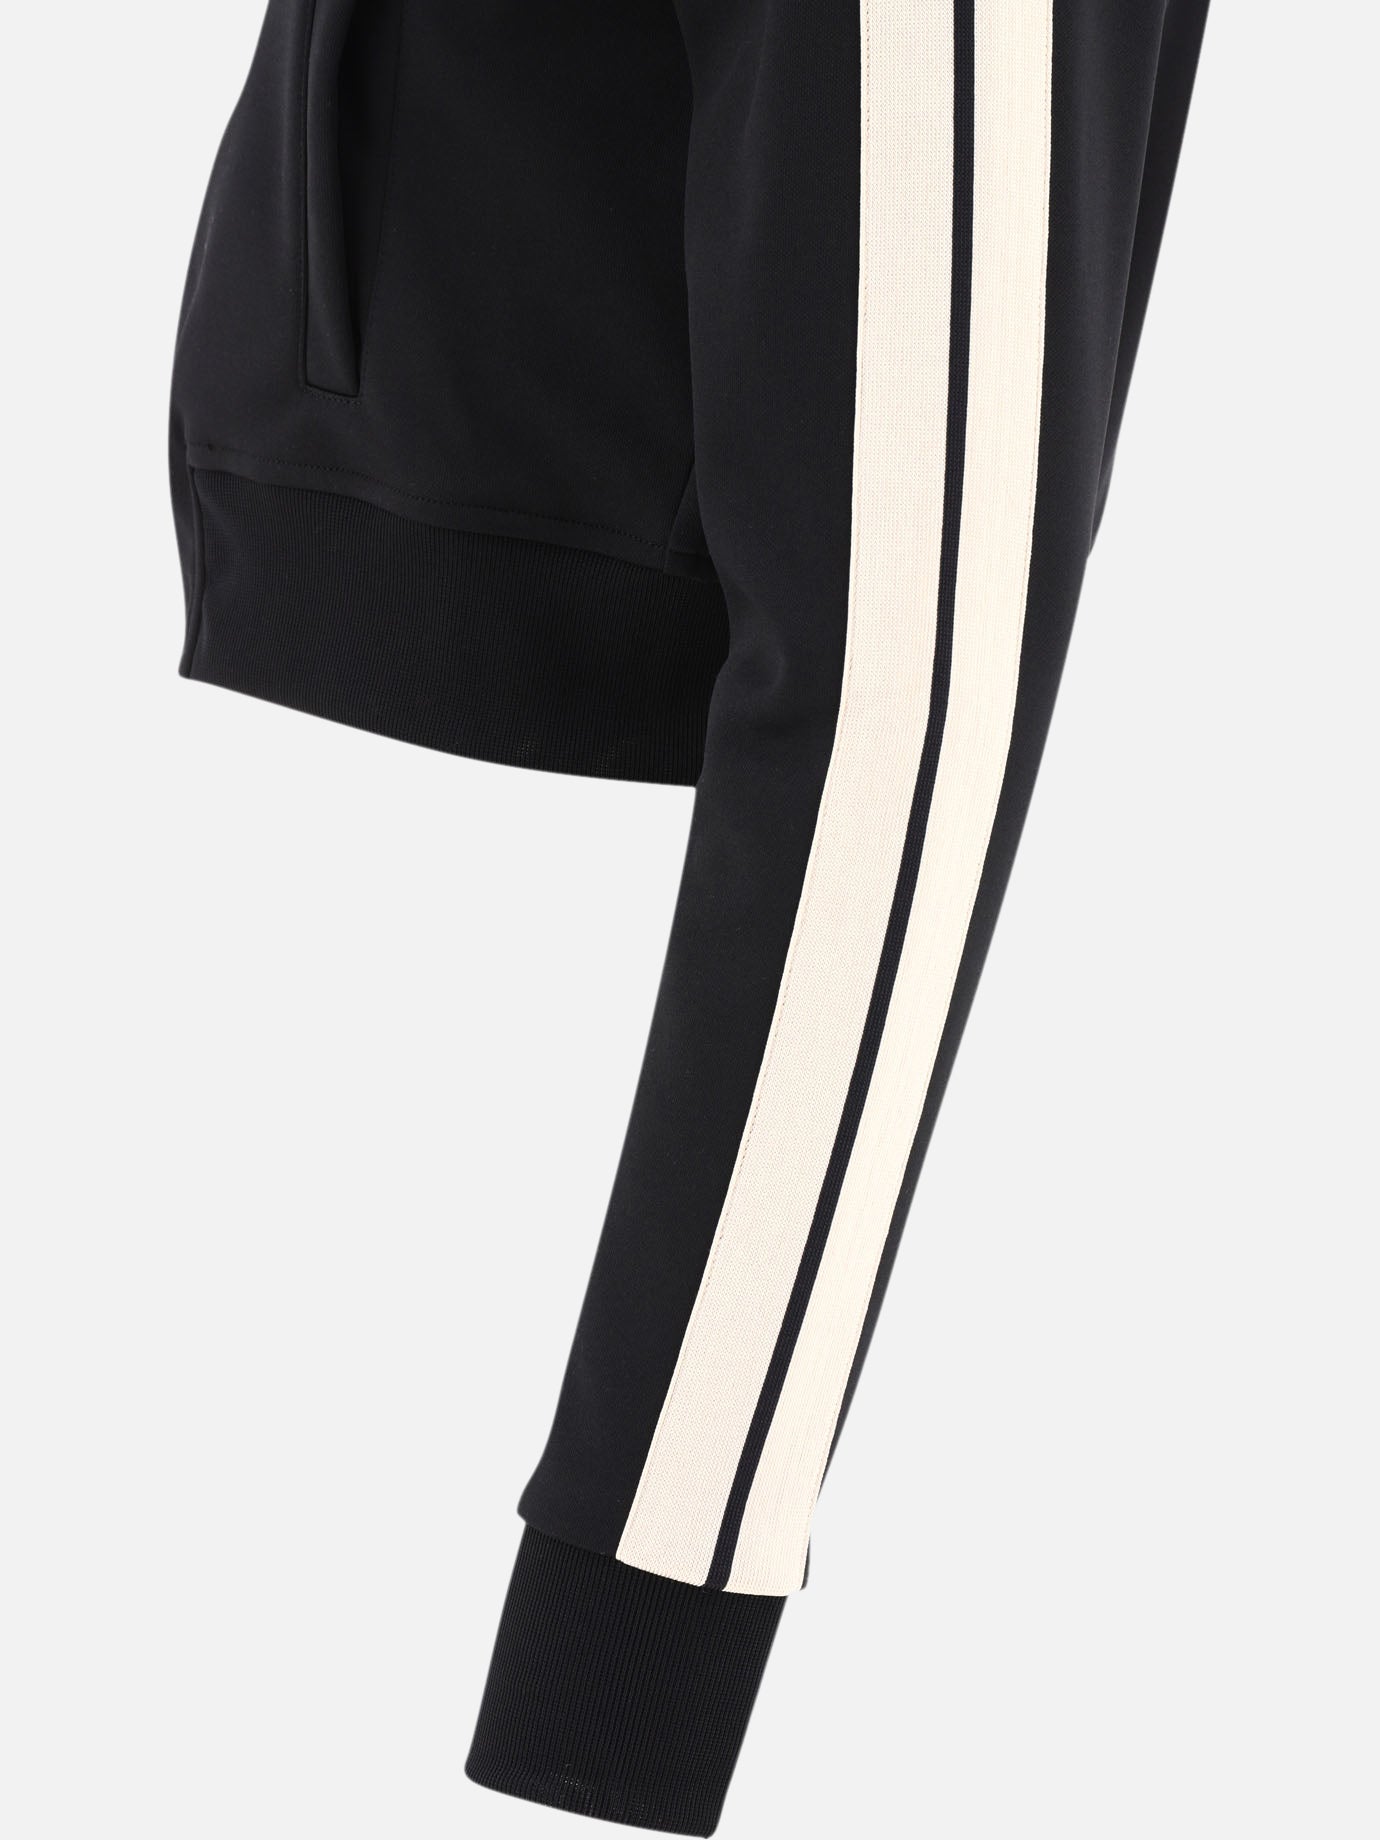 Track sweatshirt with contrasting stripes